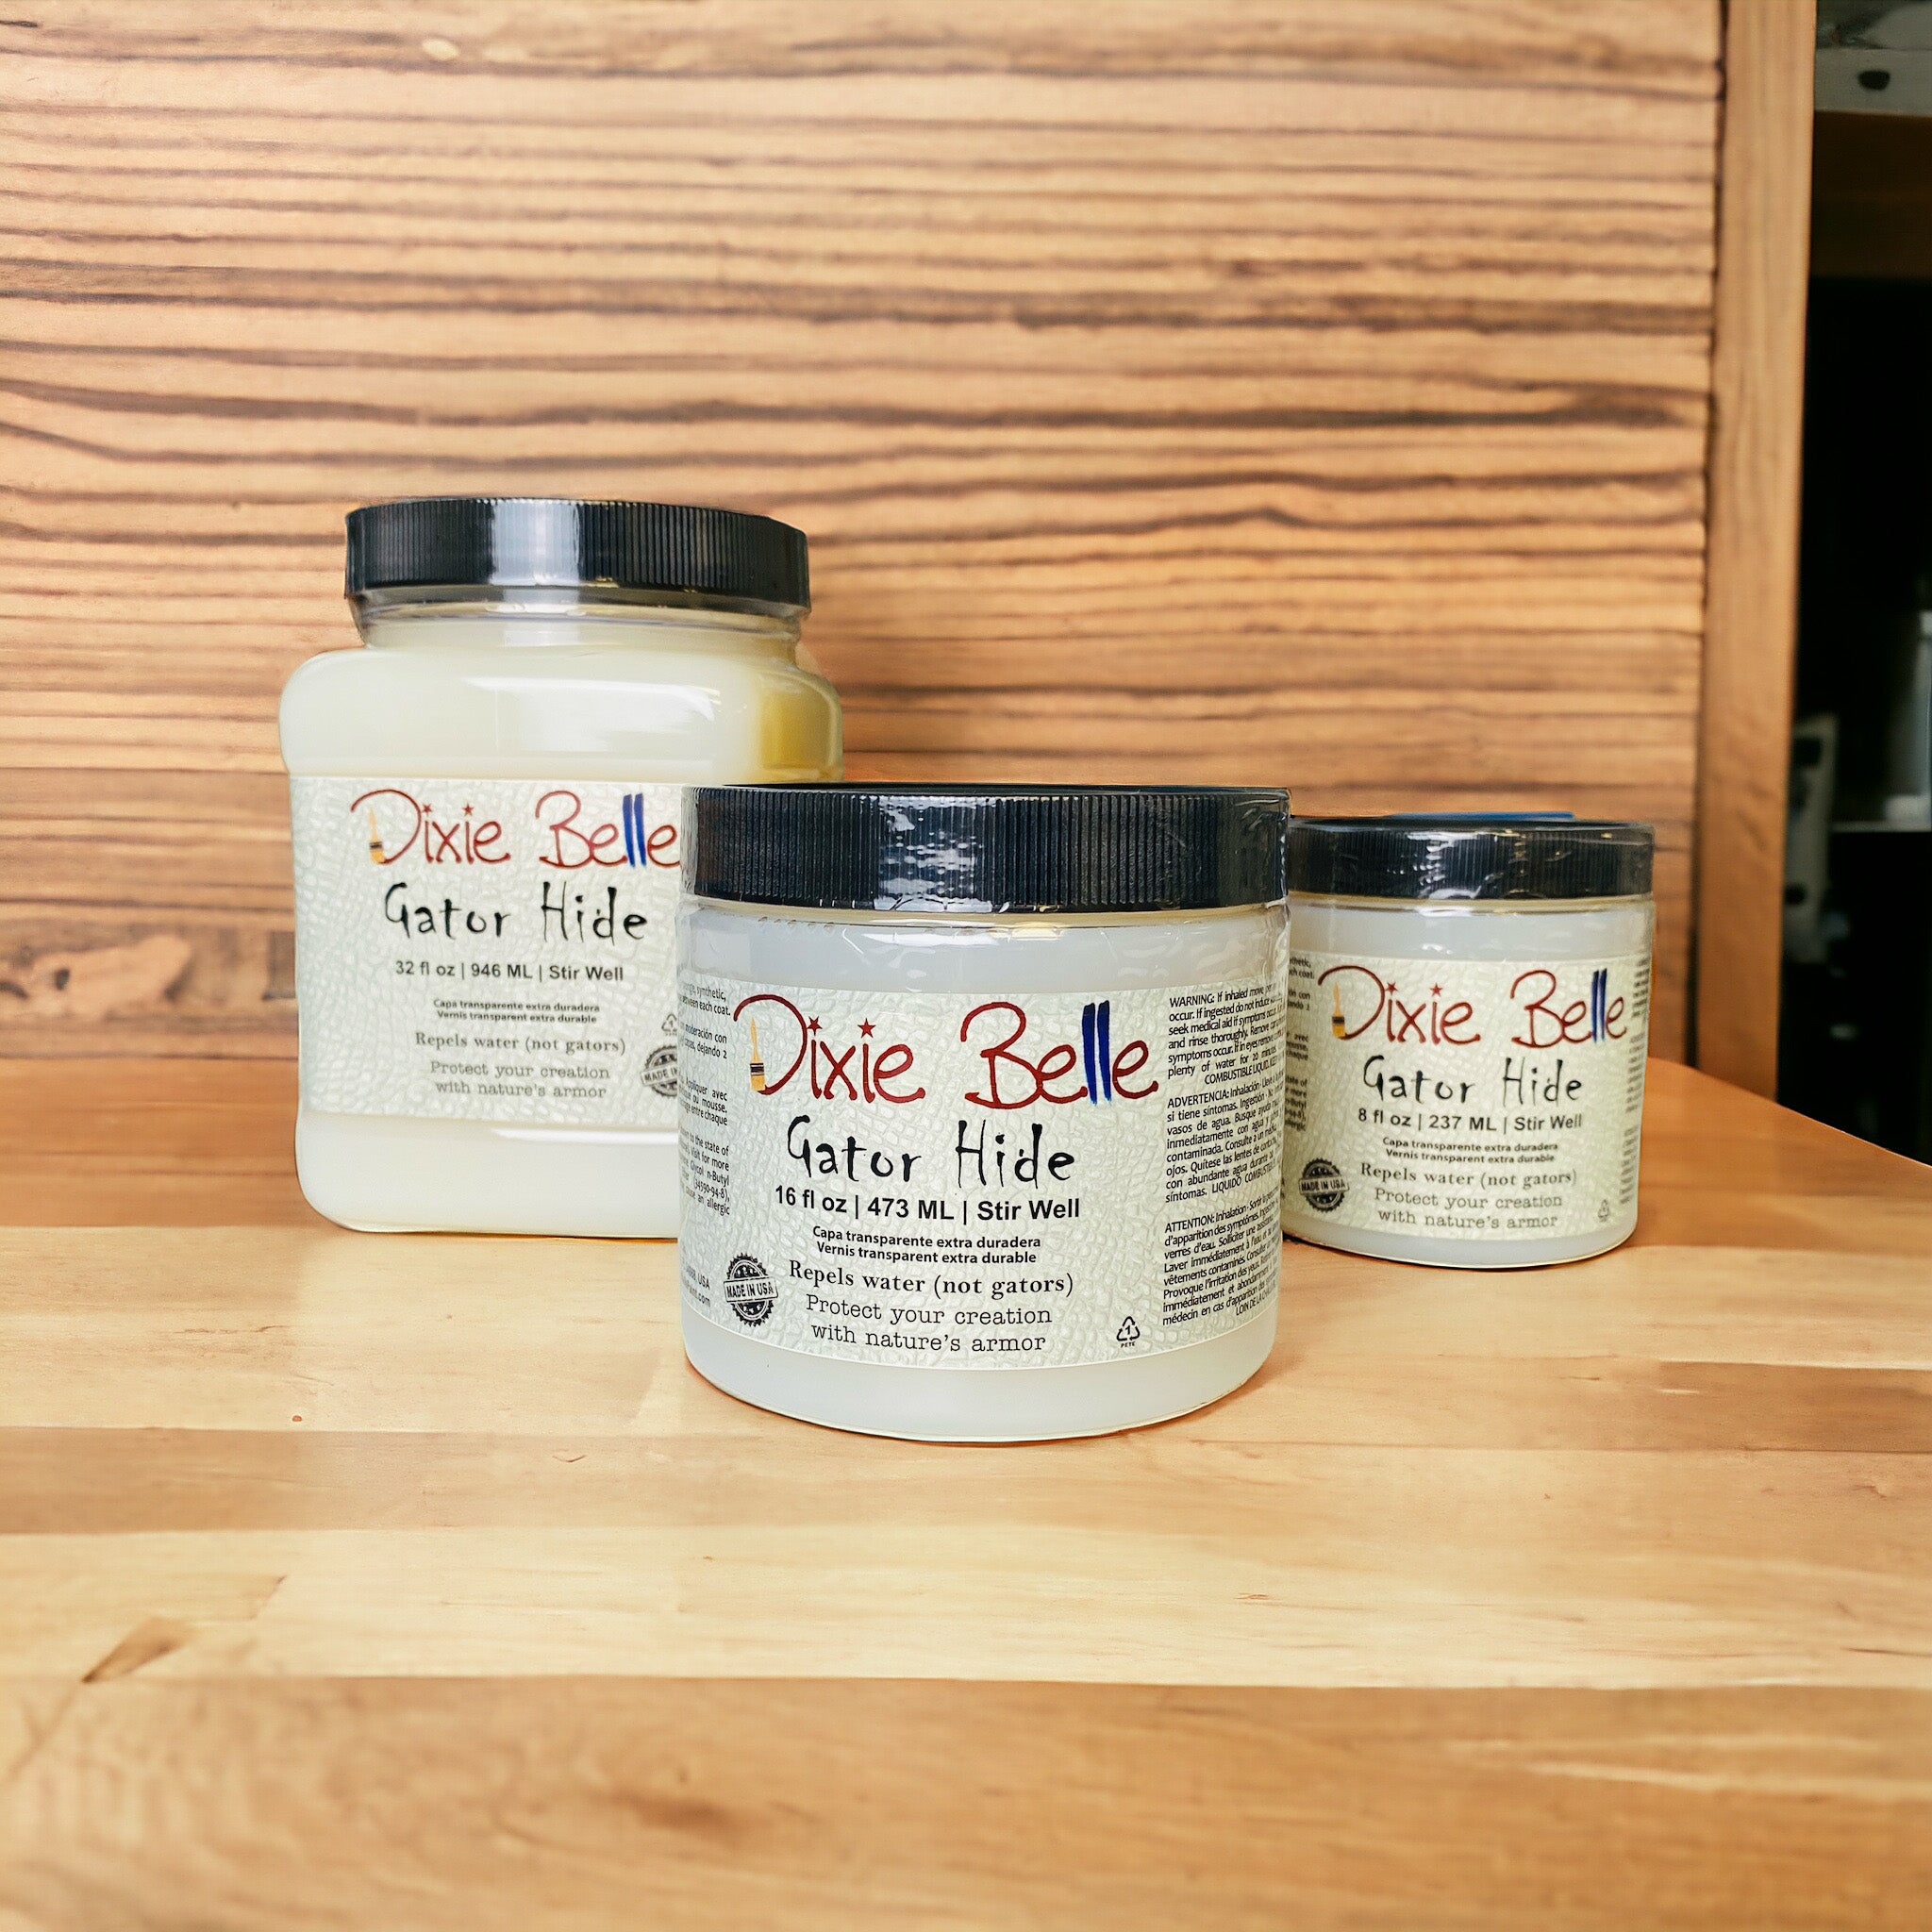 Three containers of Dixie Belle Paint Company's Gator Hide in 3 sizes (32, 16, and 8 fluid ounces) are against a wood background.